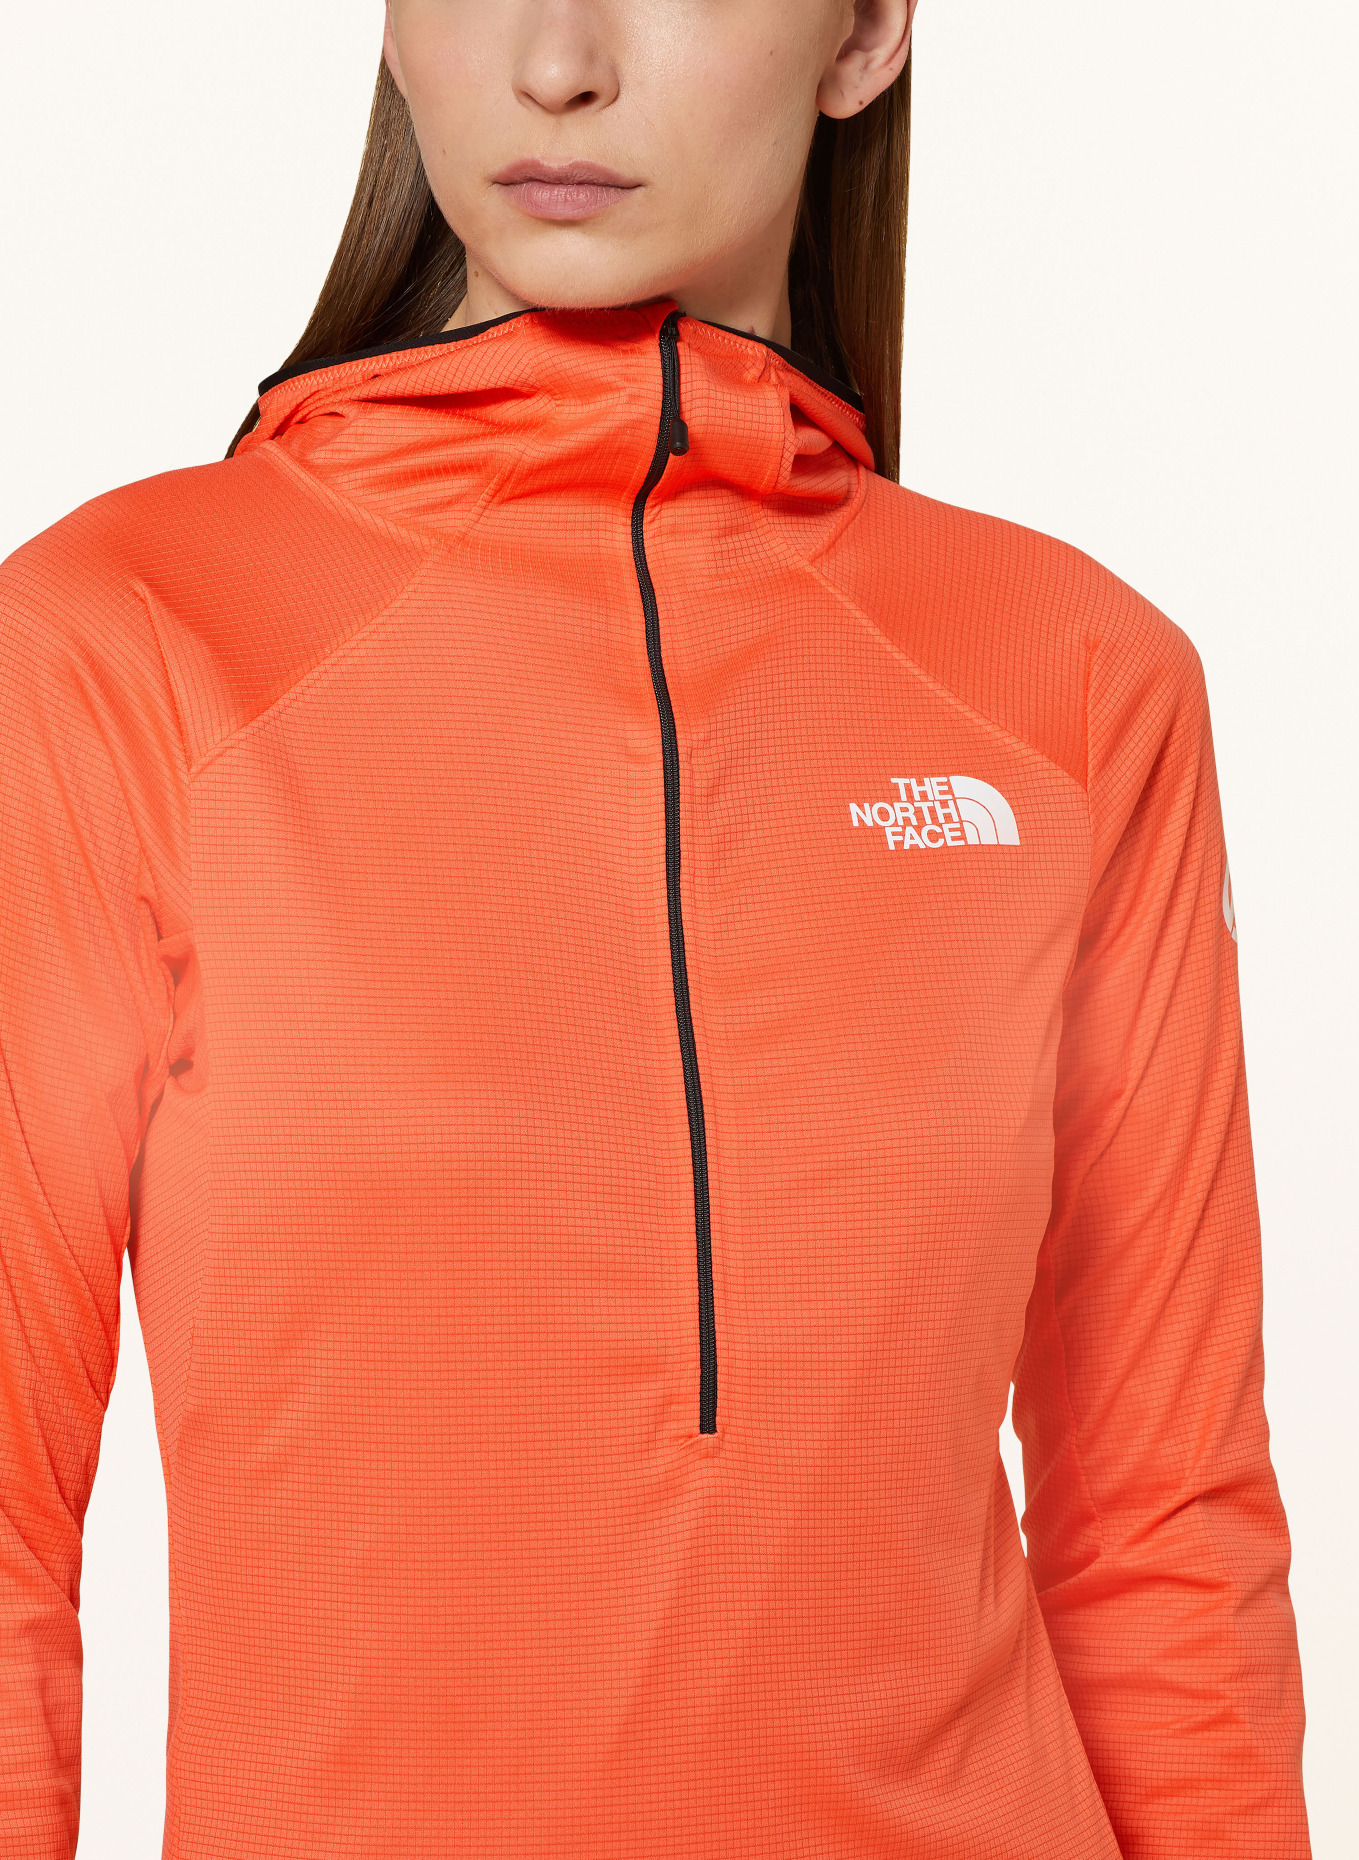 THE NORTH FACE Undershirt SUMMIT with UV protection, Color: ORANGE (Image 5)